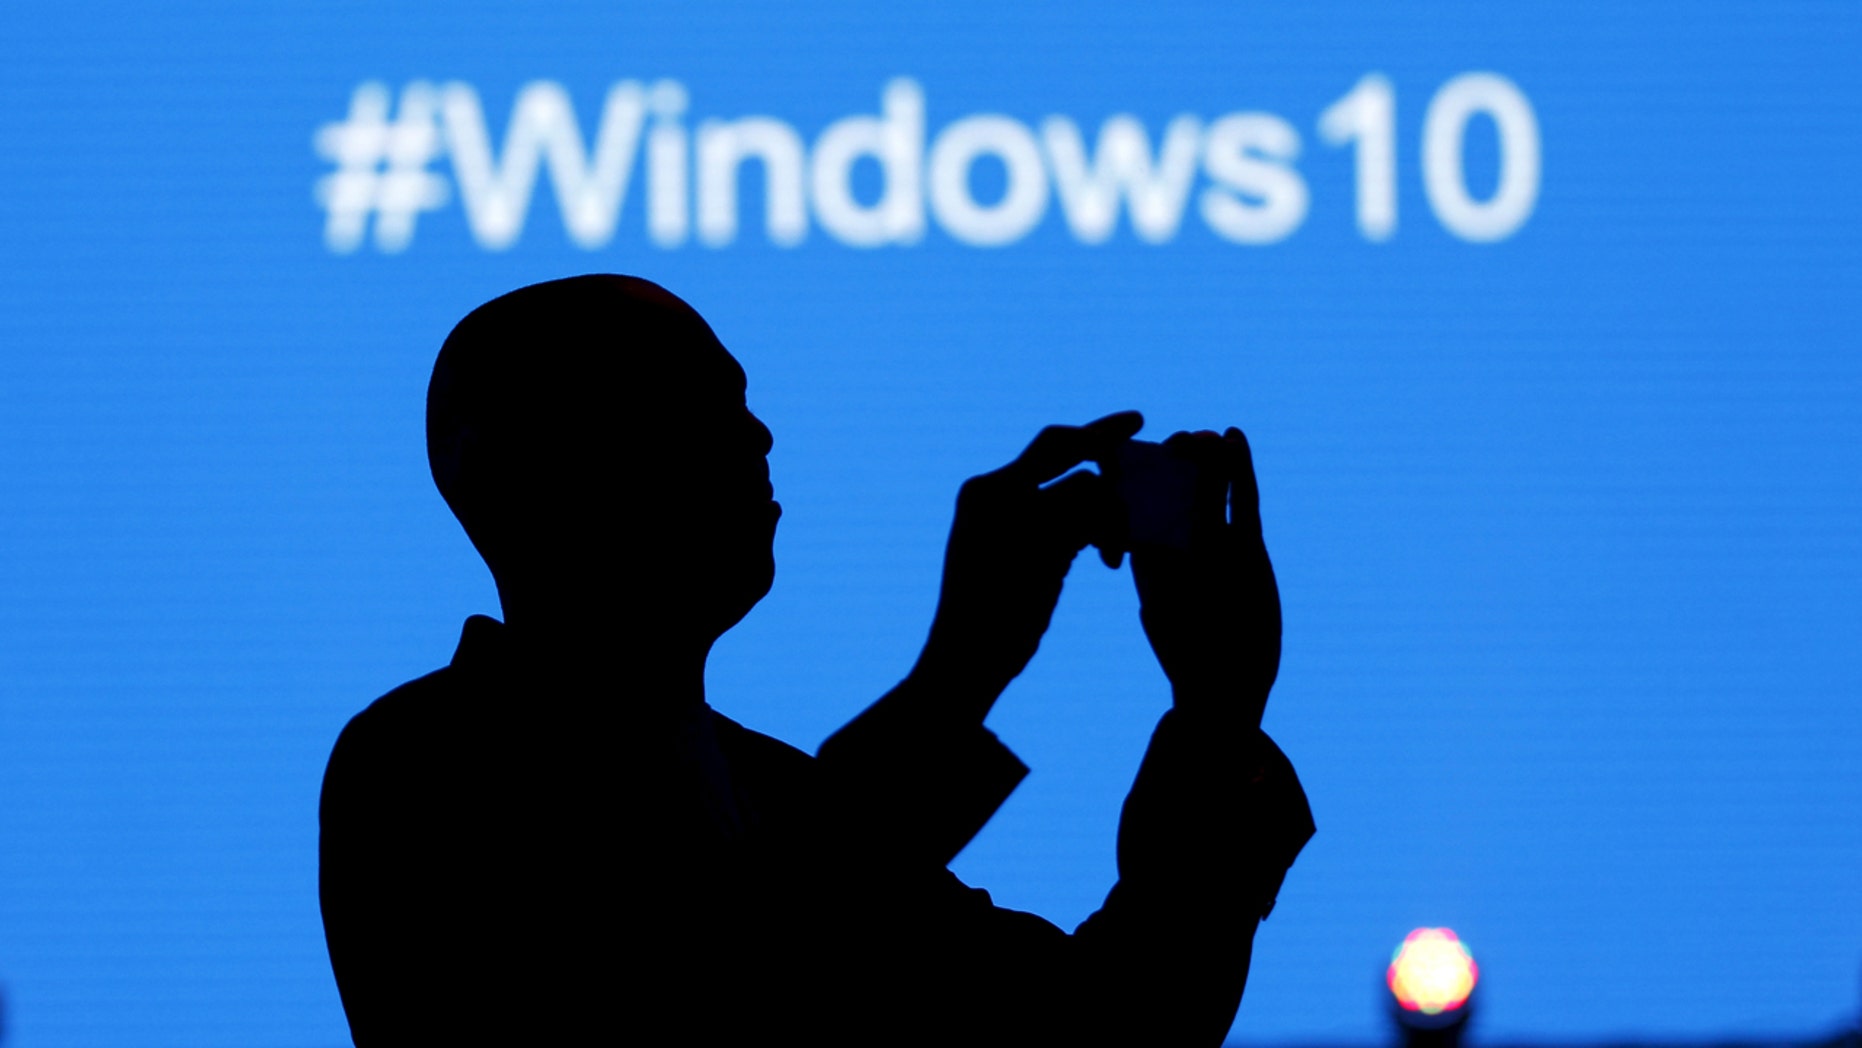 A Microsoft delegate takes a picture during the launch of the Windows 10 operating system in Kenya's capital Nairobi, July 29, 2015 - file photo.